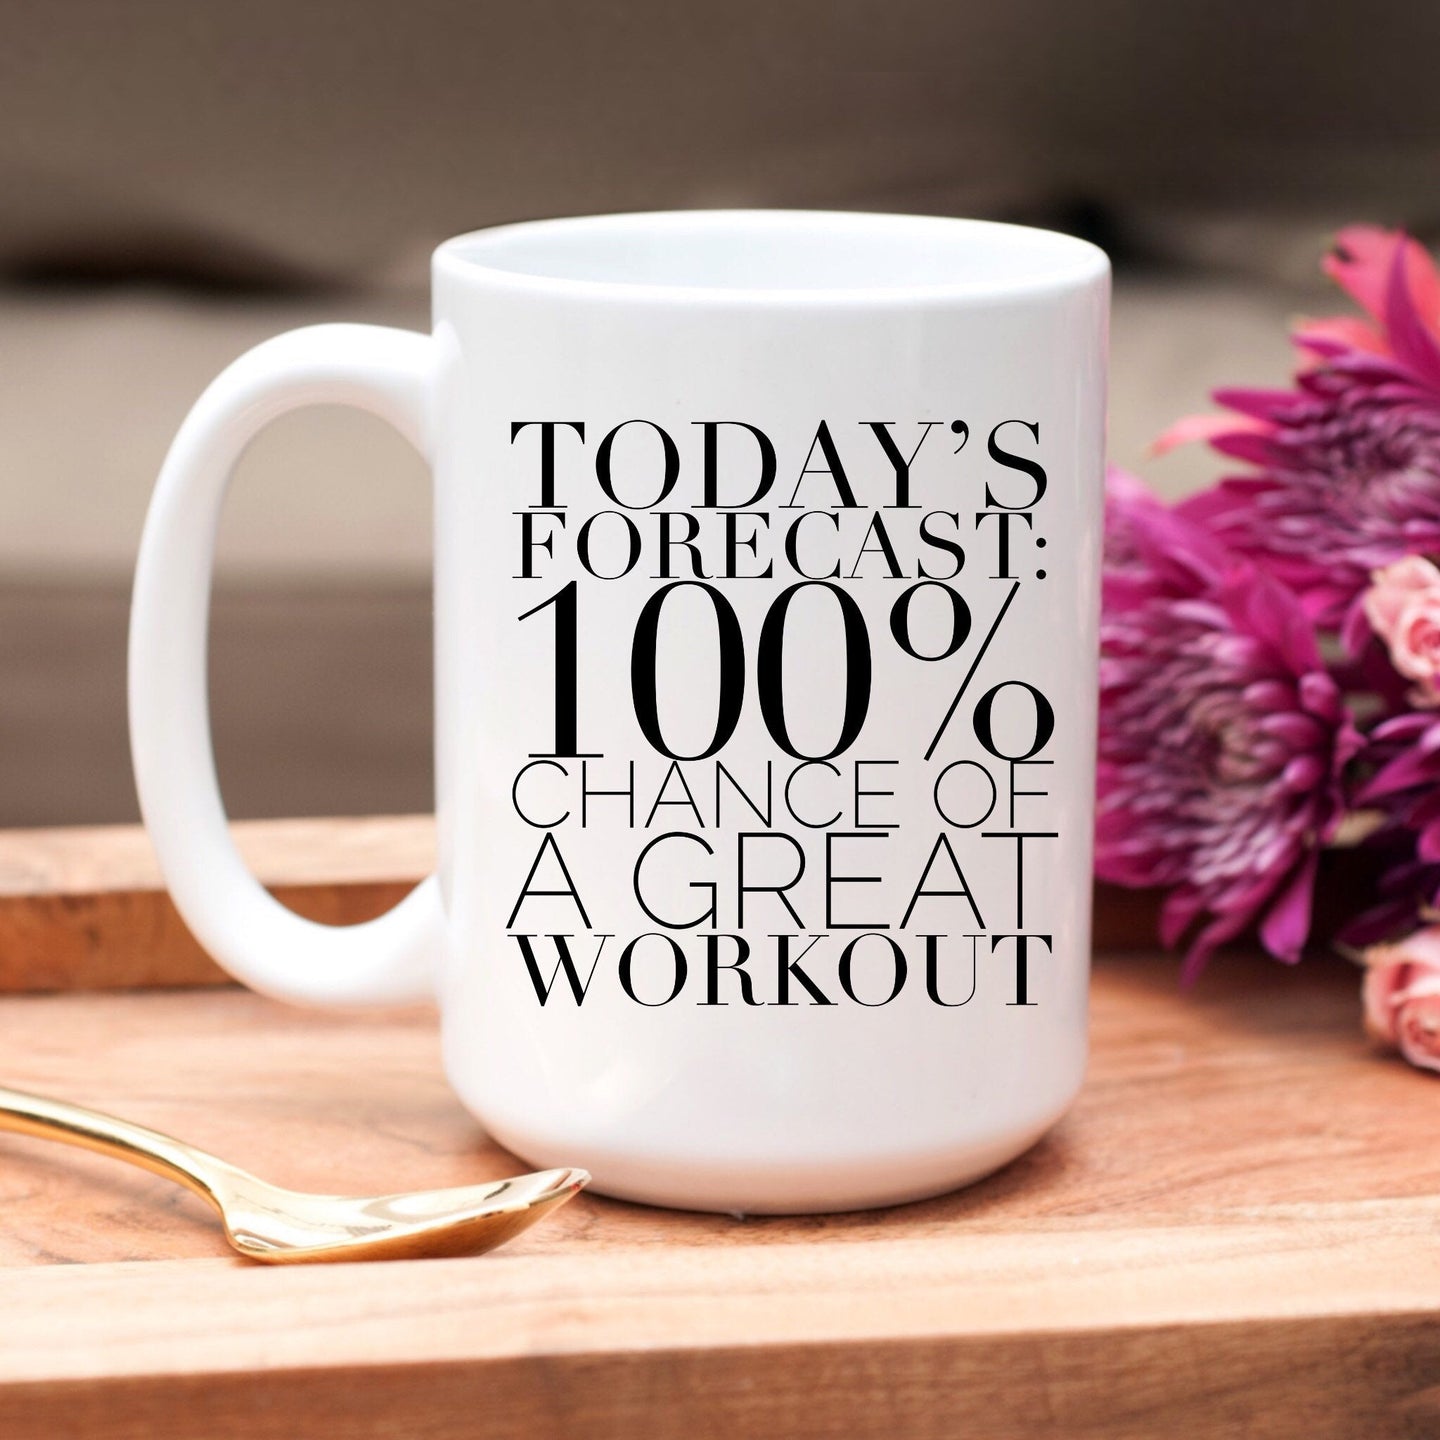 Today's Forecast: 100% chance of a great workout